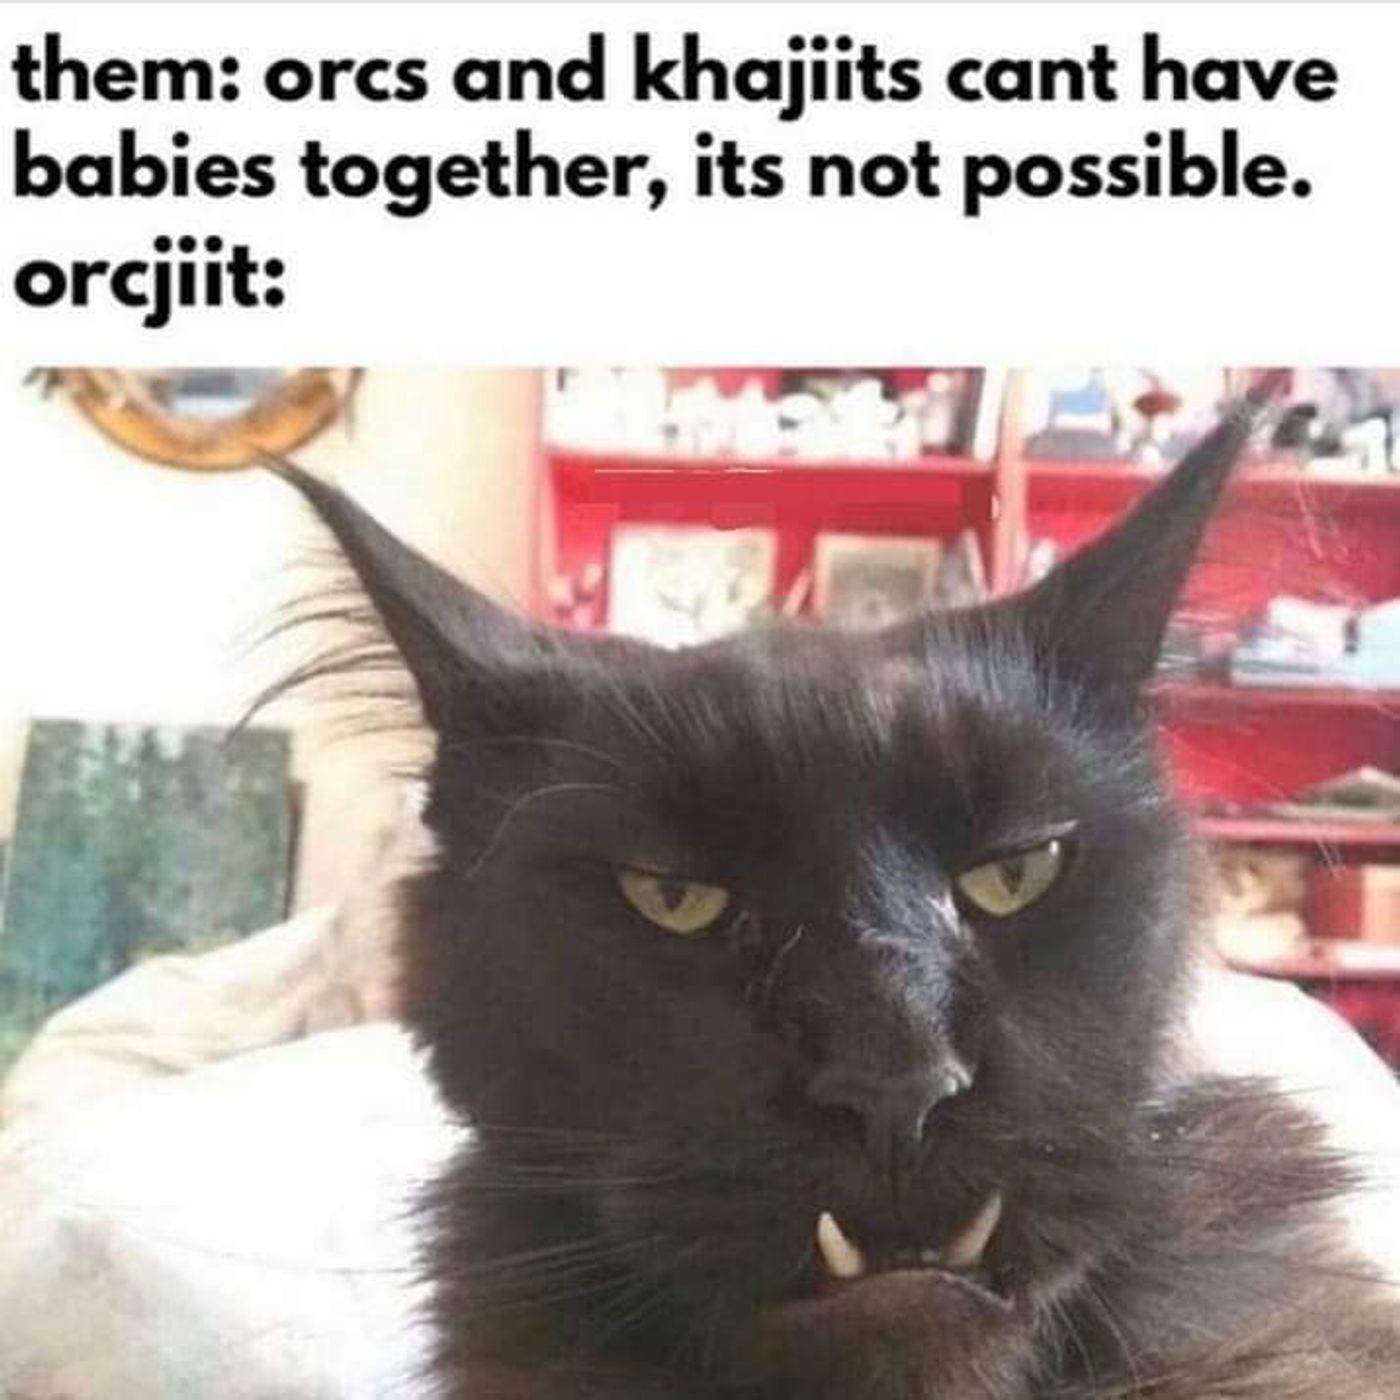 Elder Scrolls: 10 Khajiit Memes That Are Hilarious (If You Have Coin)